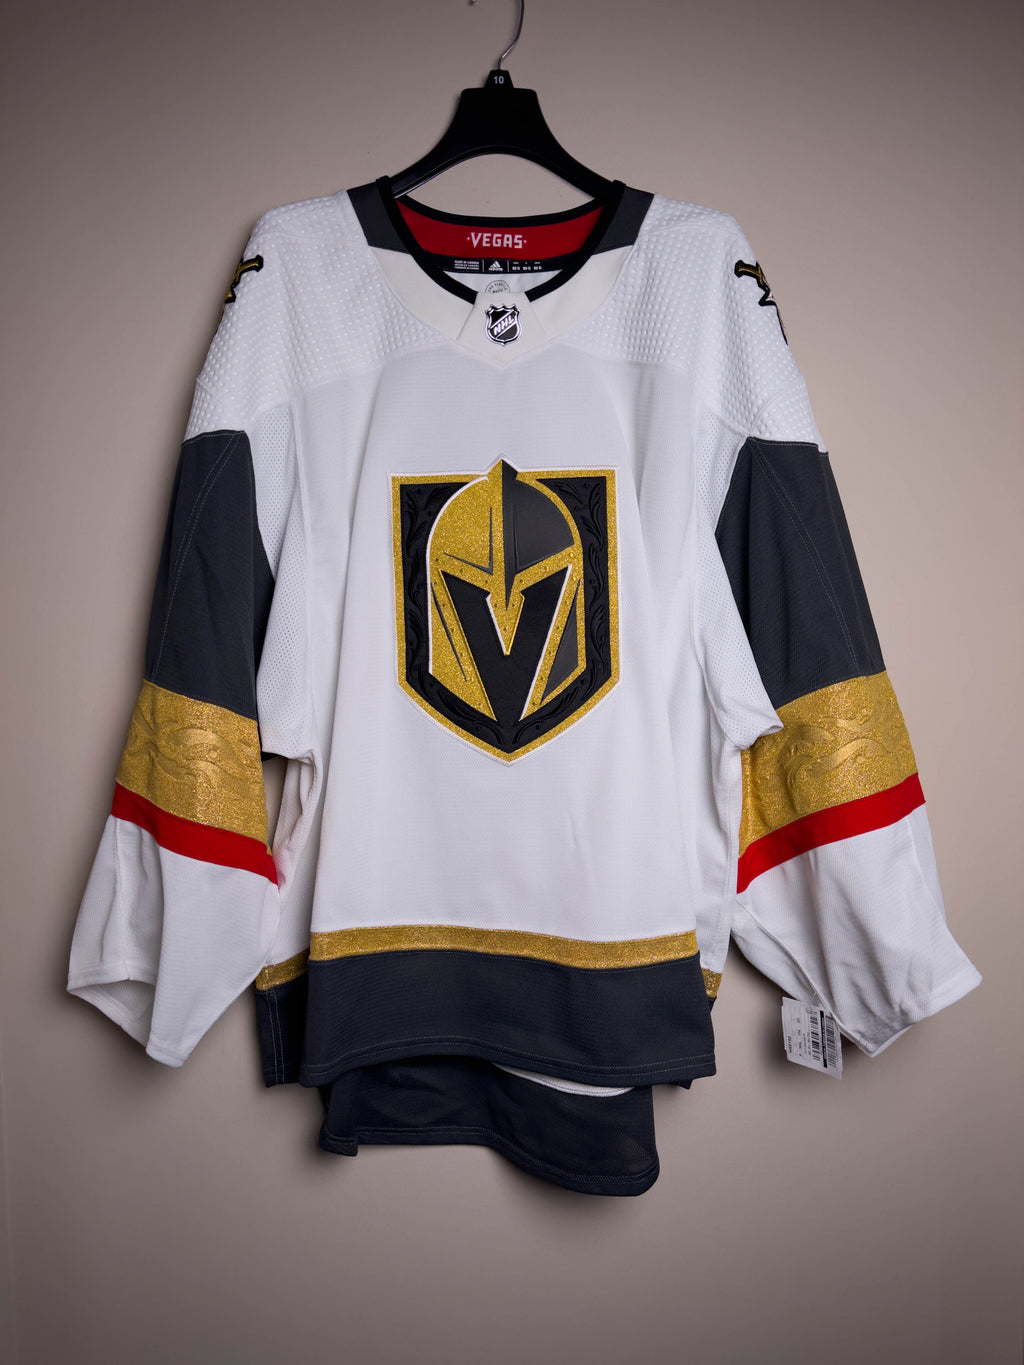 Vegas Golden Knights NHL Adidas MiC Team Issued Away Jersey Size